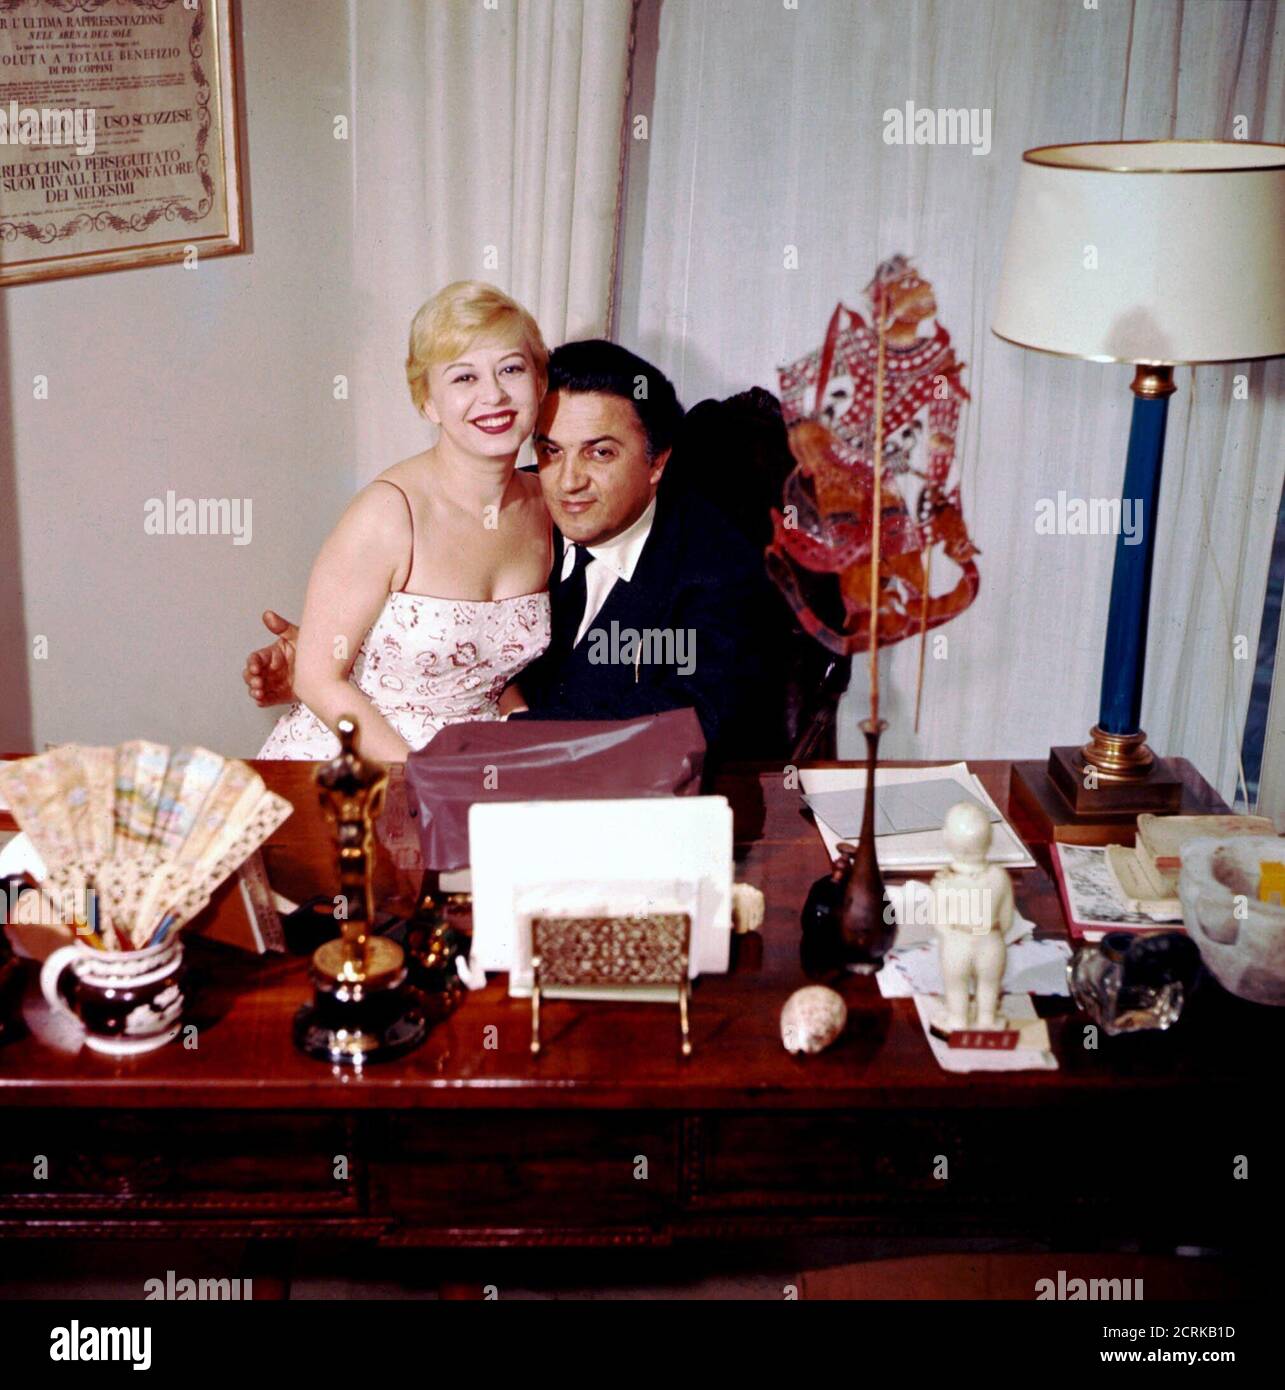 The director Federico Fellini with his wife the actress Giulietta Masina in  their home, Rome, 1958 Stock Photo - Alamy